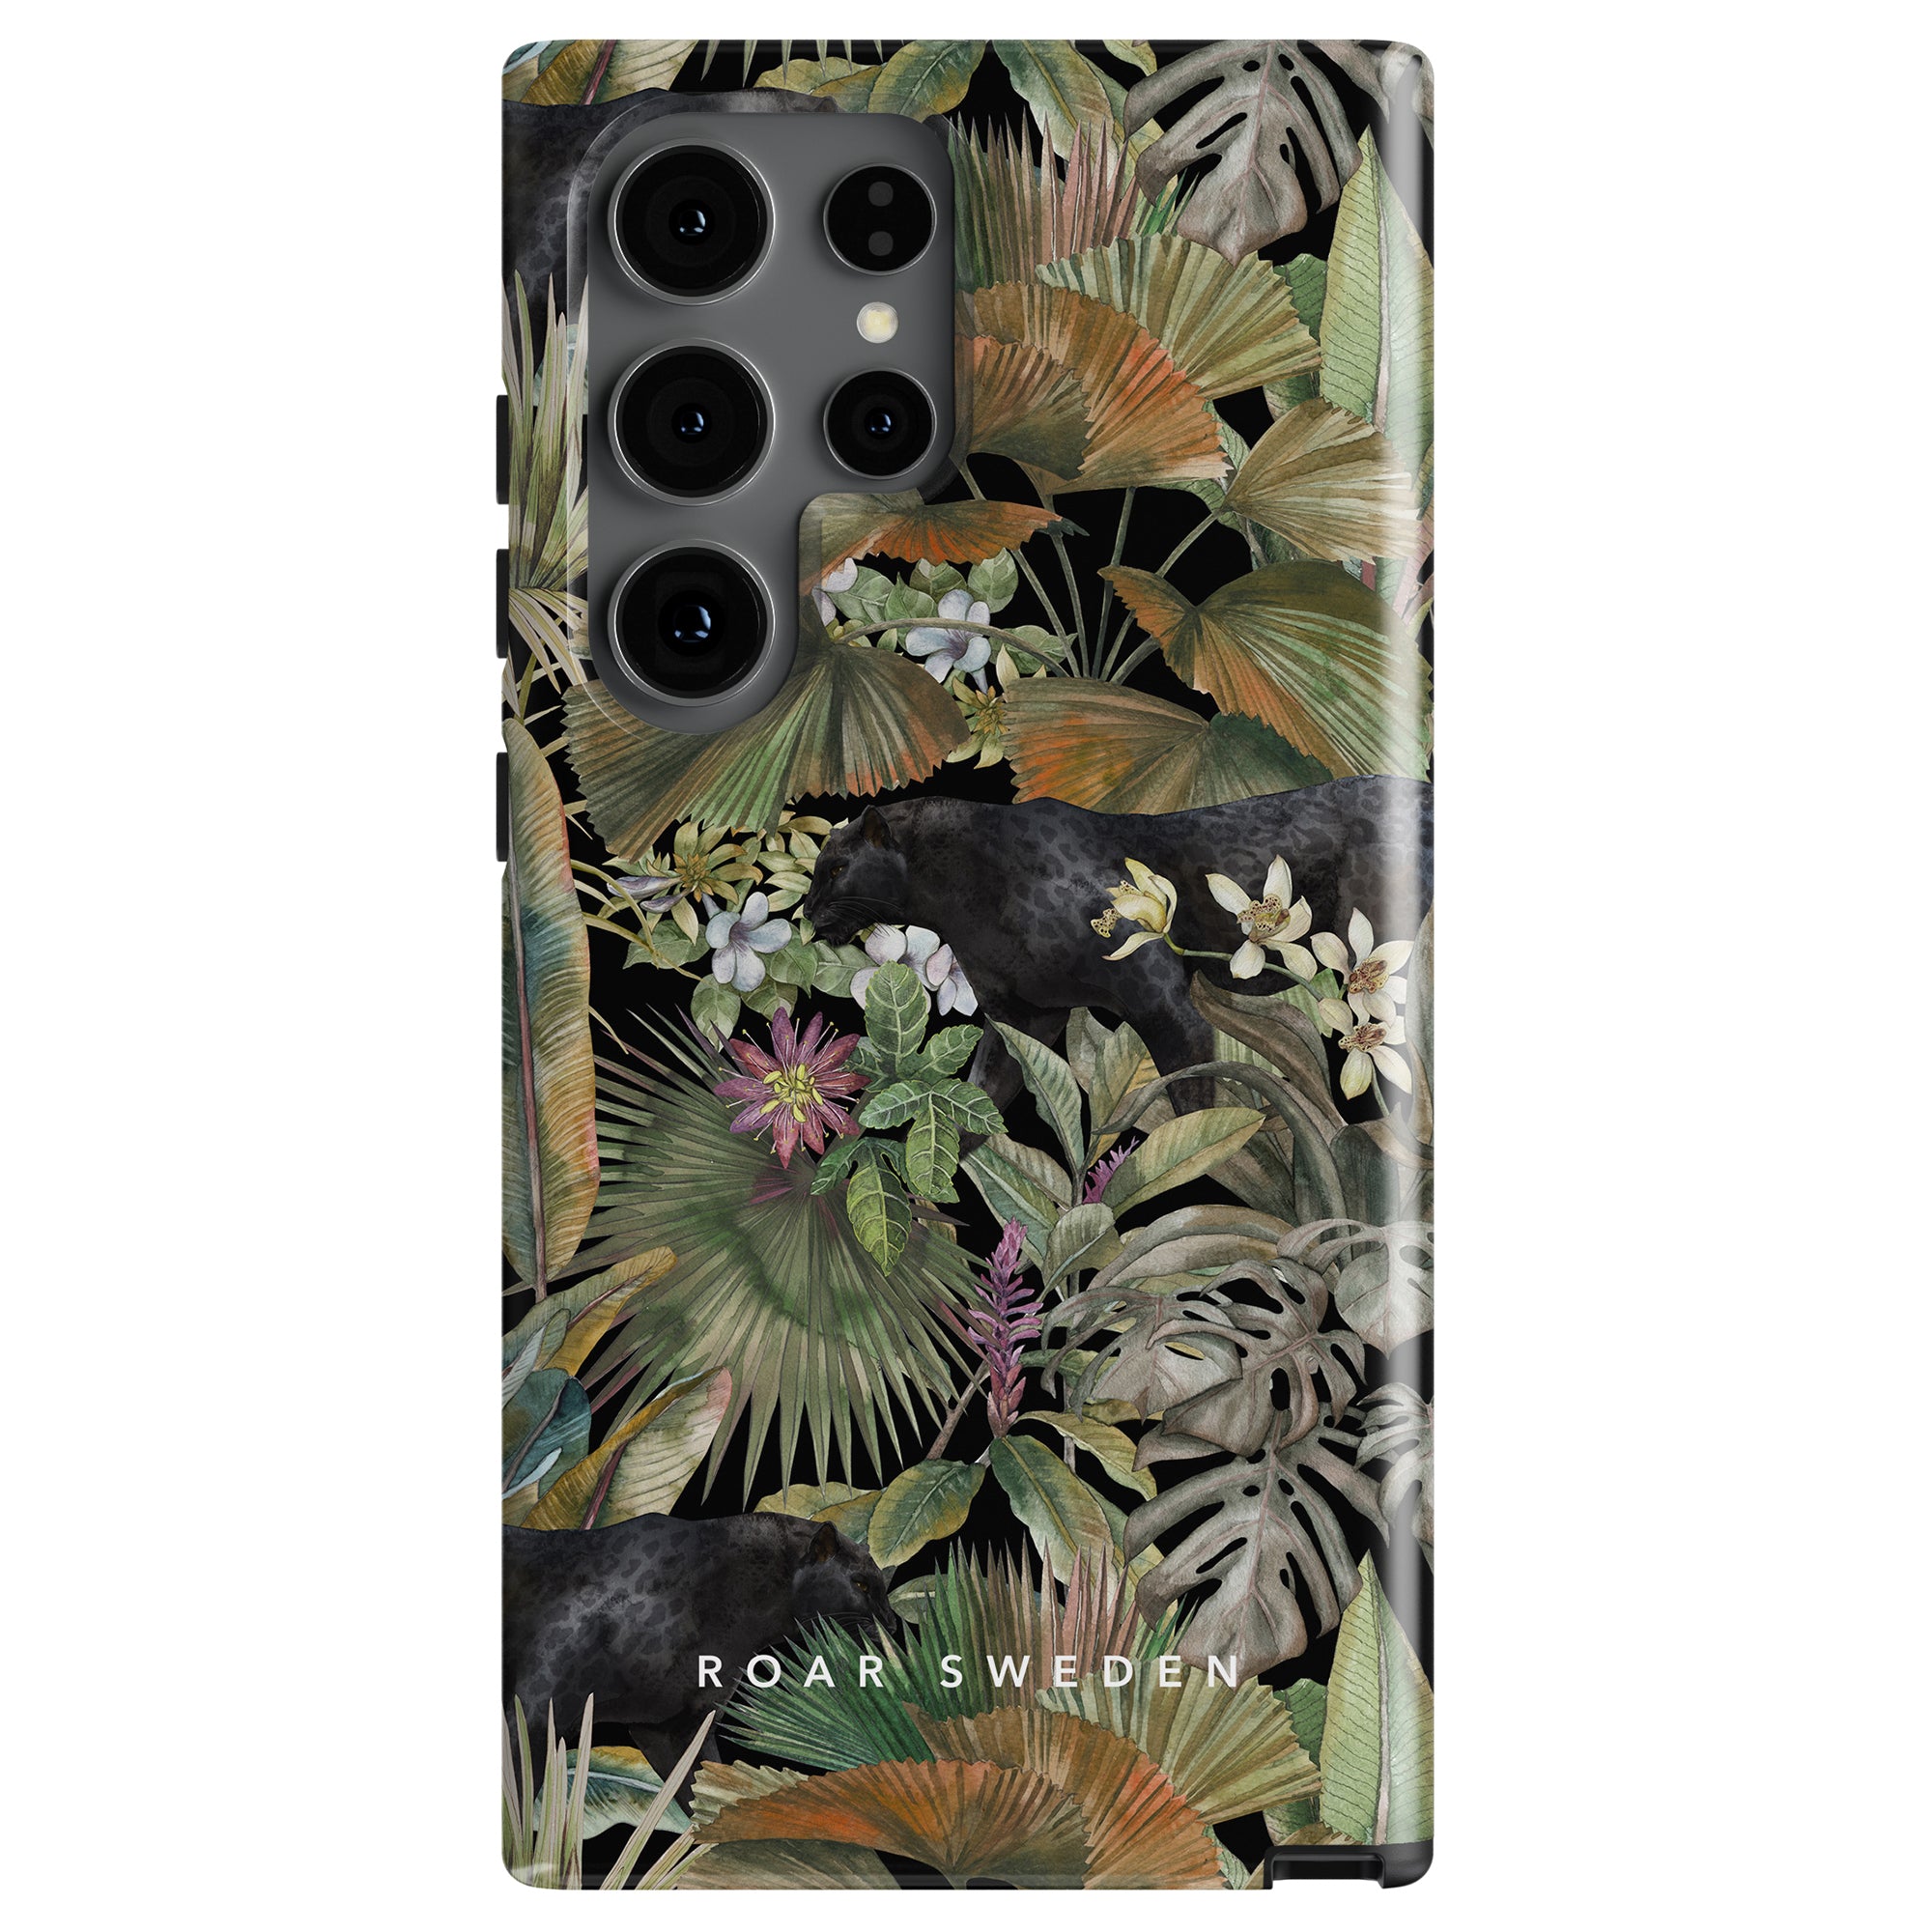 A smartphone case with a tropical floral pattern of leaves and flowers on the back has "ROAR SWEDEN" printed at the bottom. This Bagheera - Tough Case ensures durability while adding a touch of exotic beauty to your device.